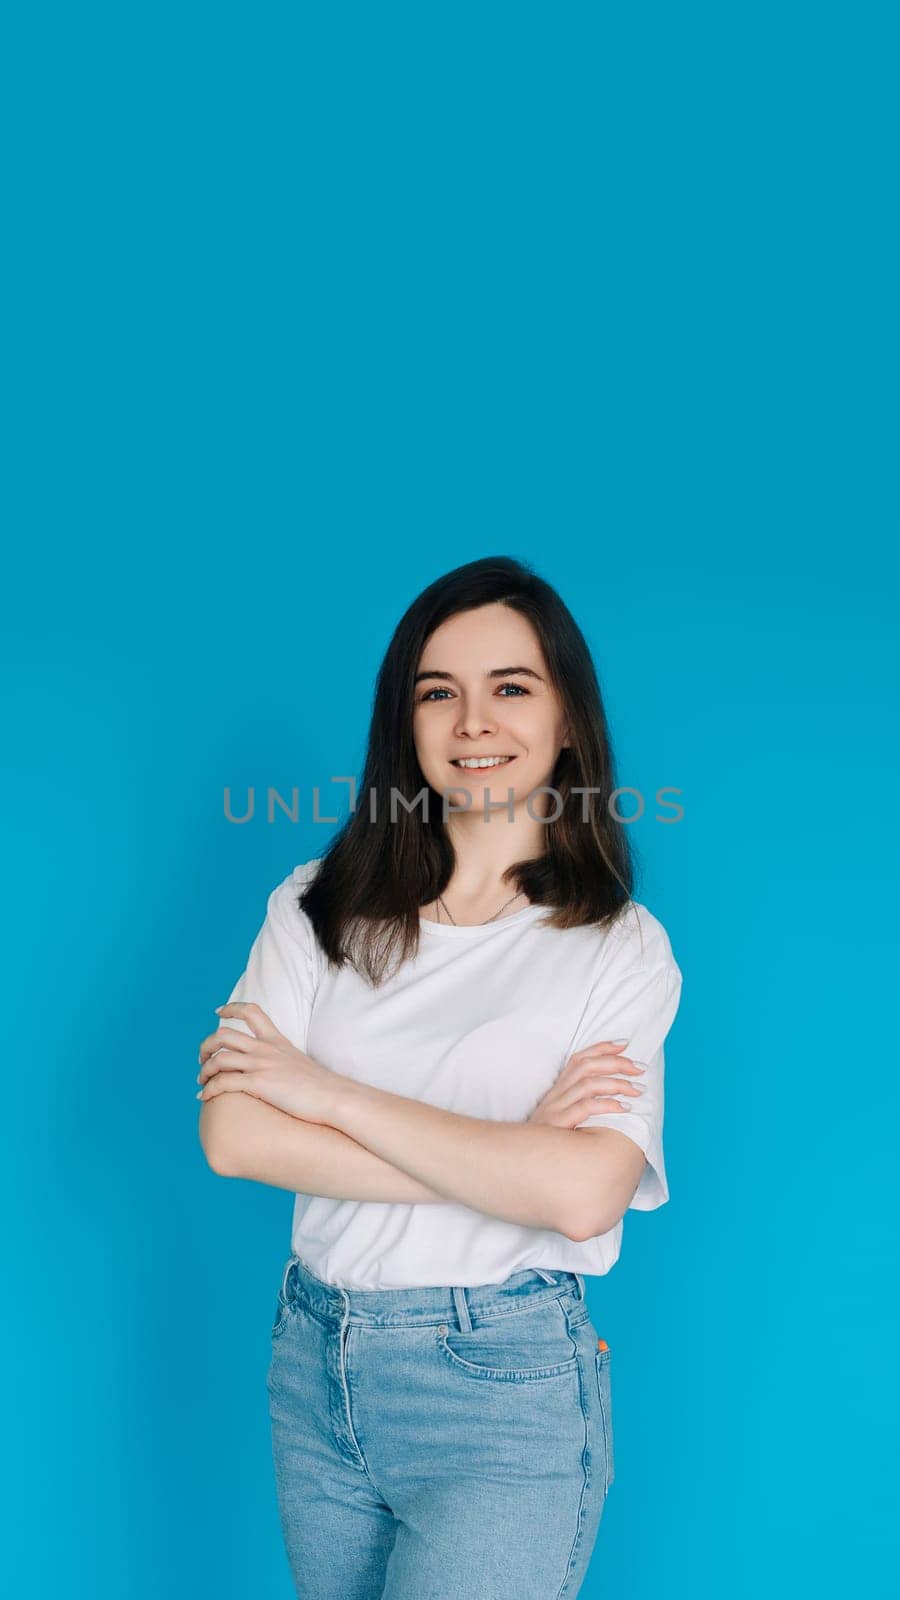 Successful Businesswoman in Casual Attire - Confident Female Office Manager with Crossed Arms - Isolated on Blue Background - Ideal for Corporate, Career, and Professional Concepts.